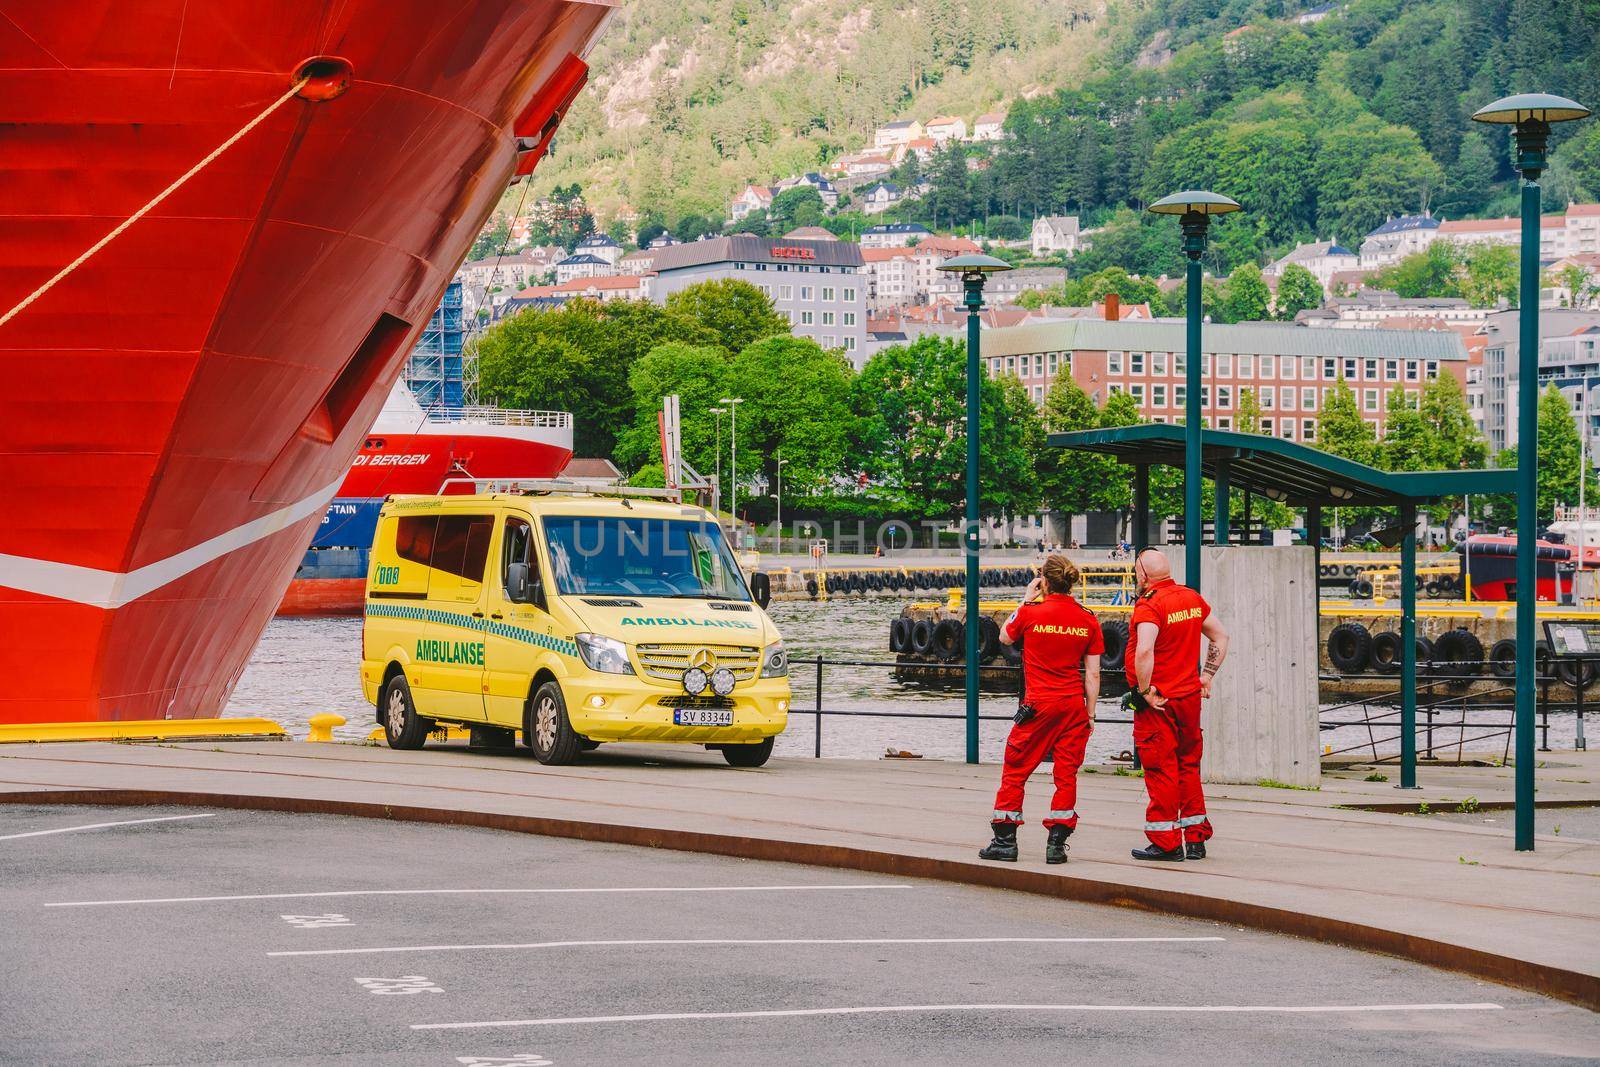 Two Norwegian paramedics in red uniforms are resting near an ambulance parked in a port near a large ship. Theme healthcare and medicine in Norway, Bergen July 28, 2019.